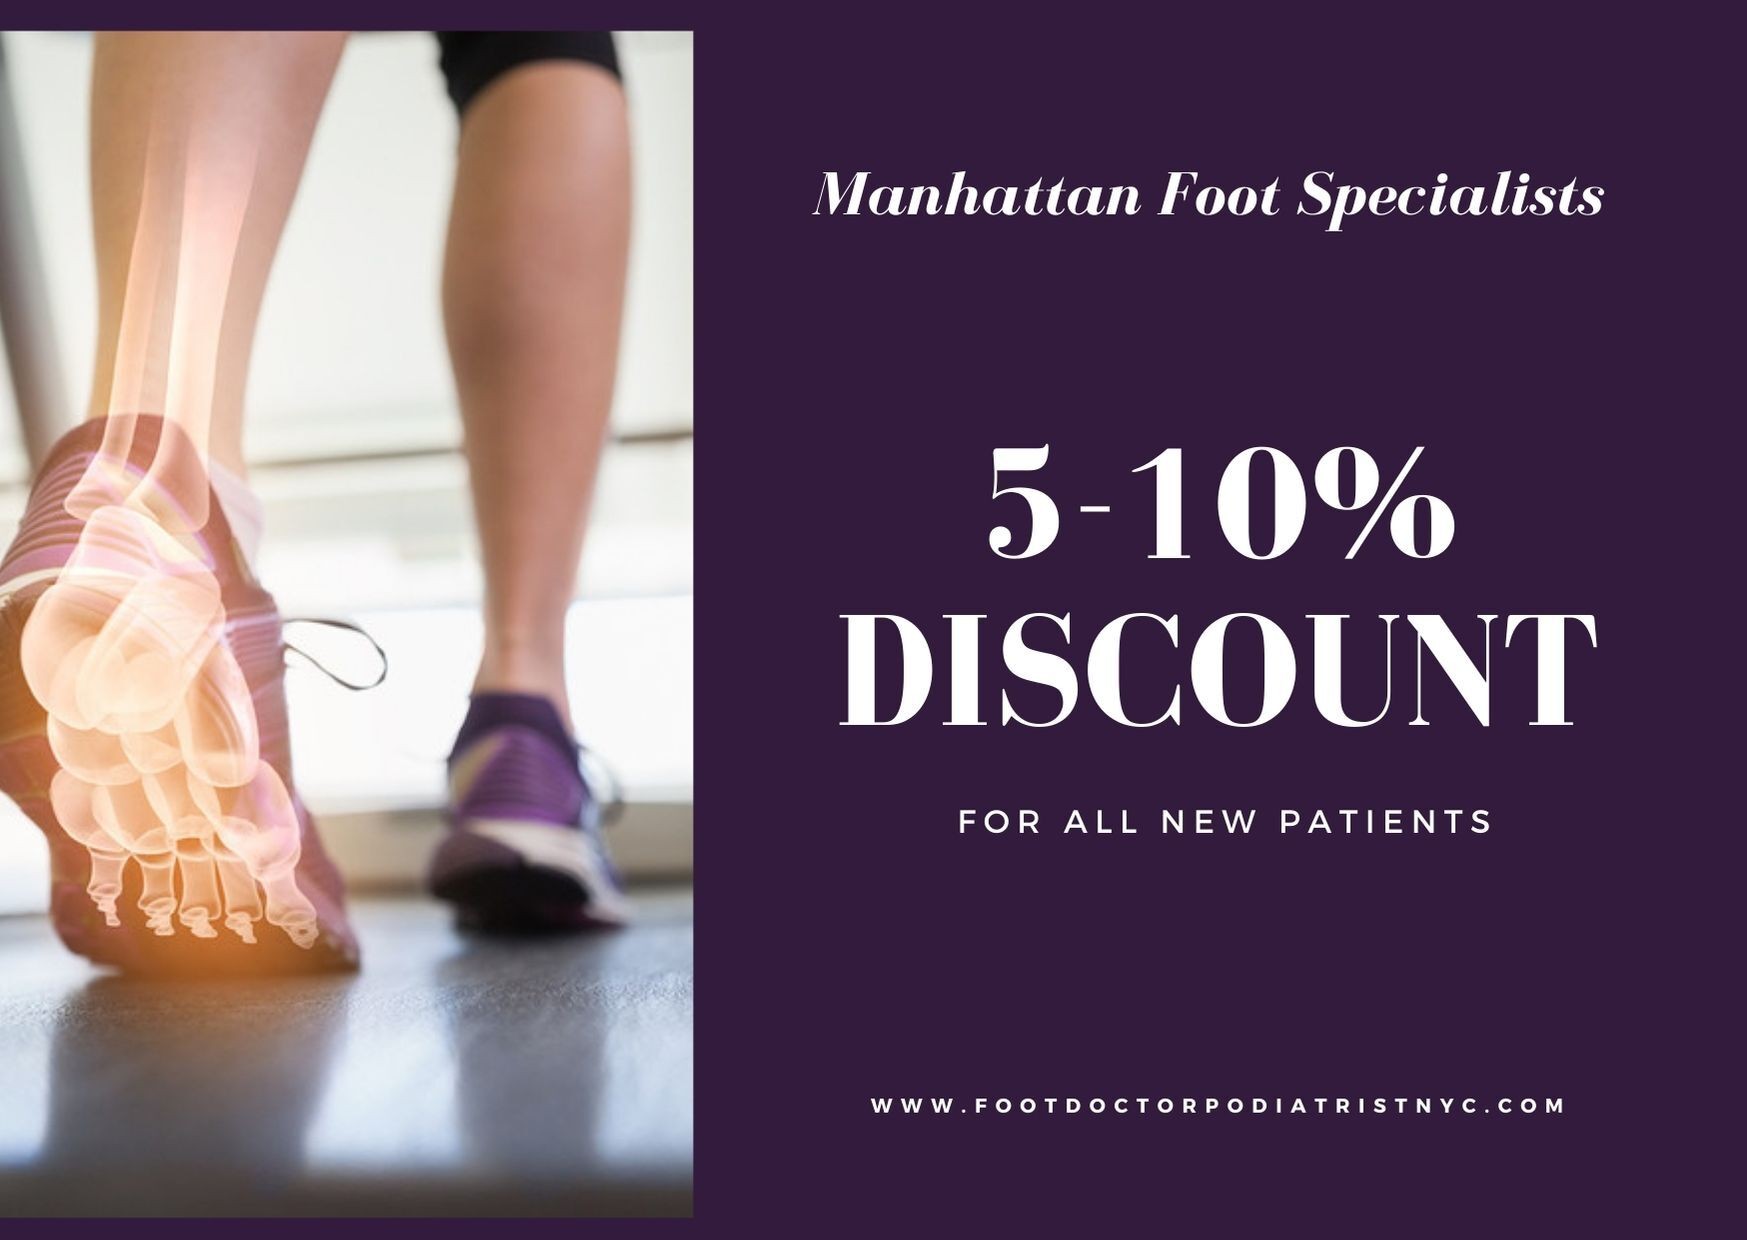 Discount for new patients from Manhattan Foot Specialists